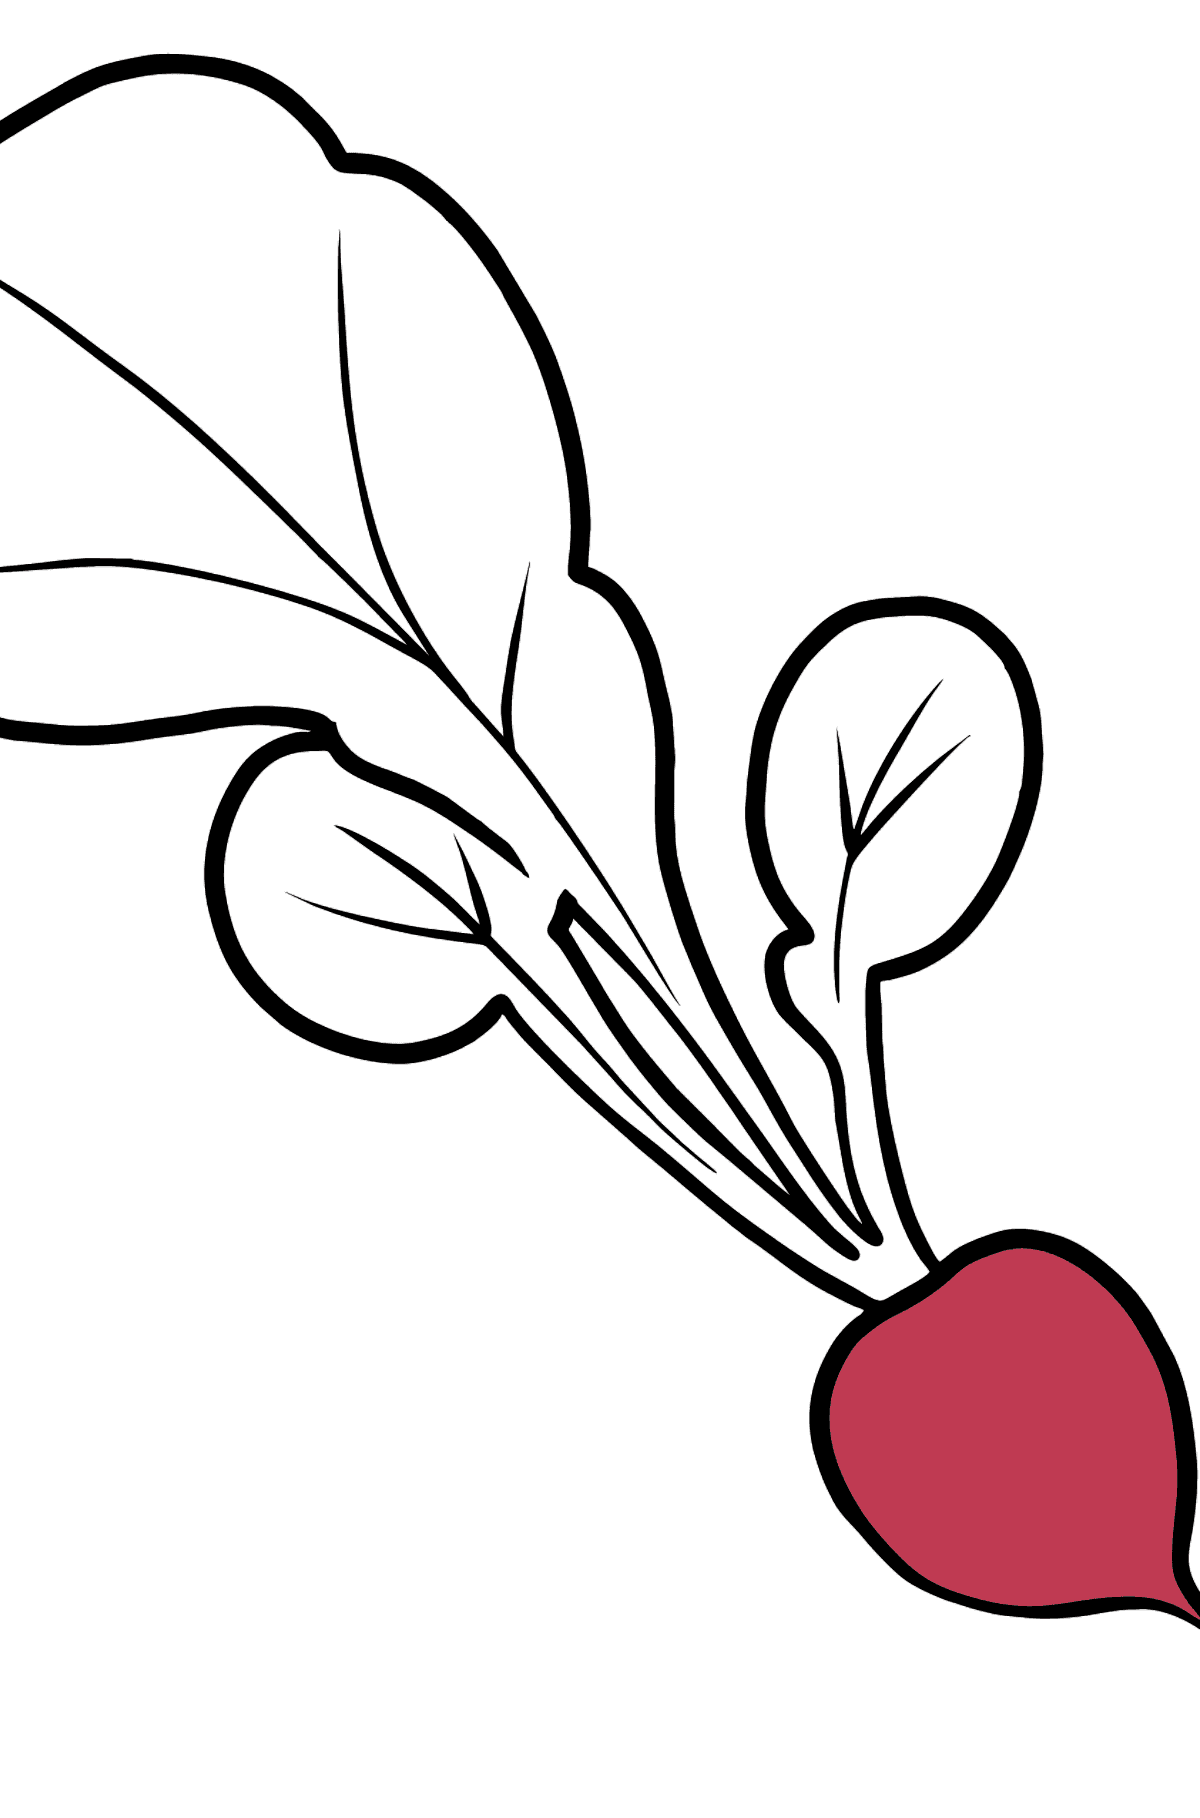 Radish coloring page - Coloring Pages for Kids